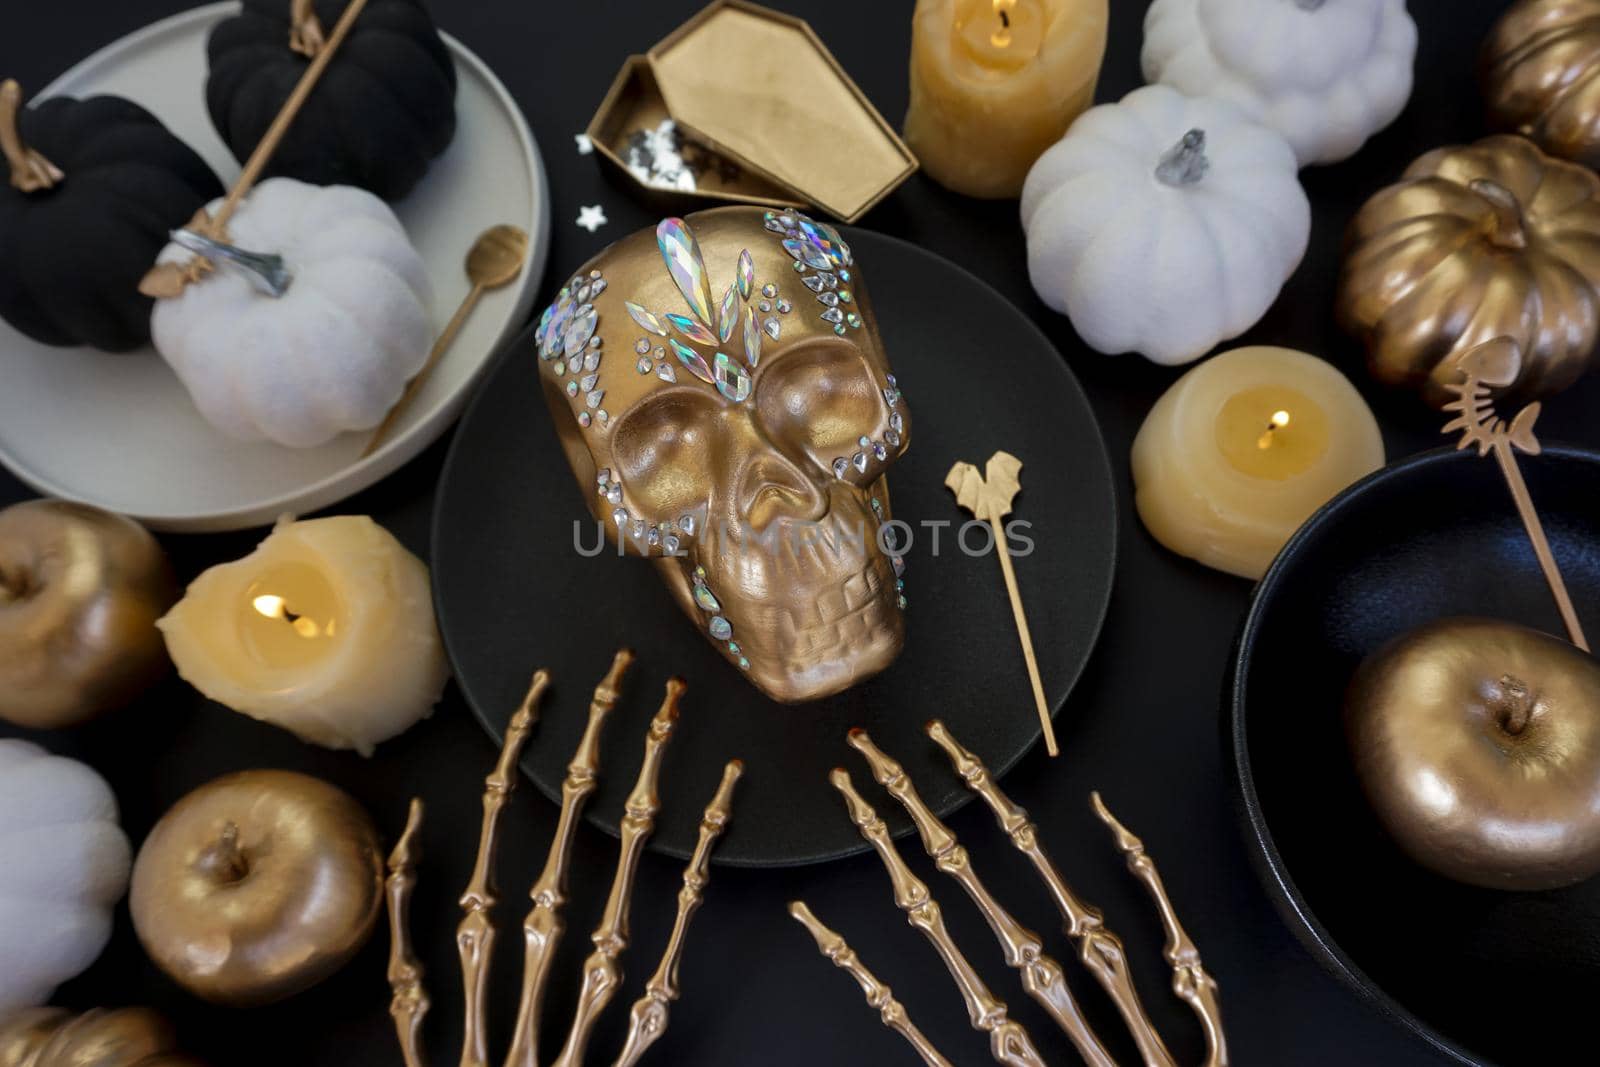 Creative photo with a golden skull and a luxurious table setting by Spirina